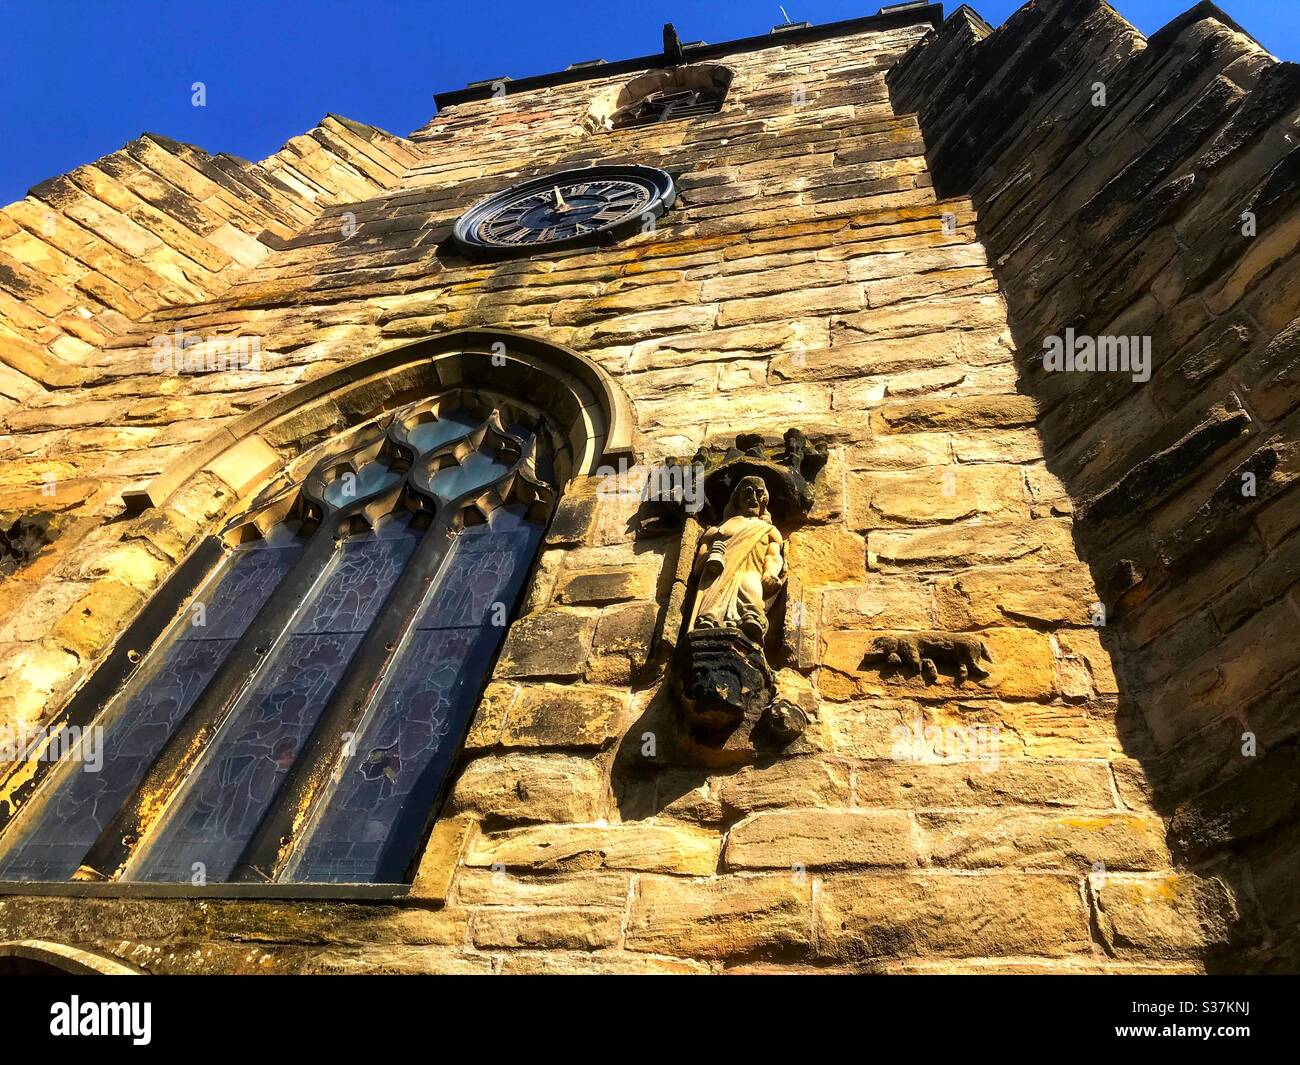 Picture of Saint Oswald’s church in Winwick Cheshire on a lovely spring day April 19th 2020 in lockdown. Stock Photo